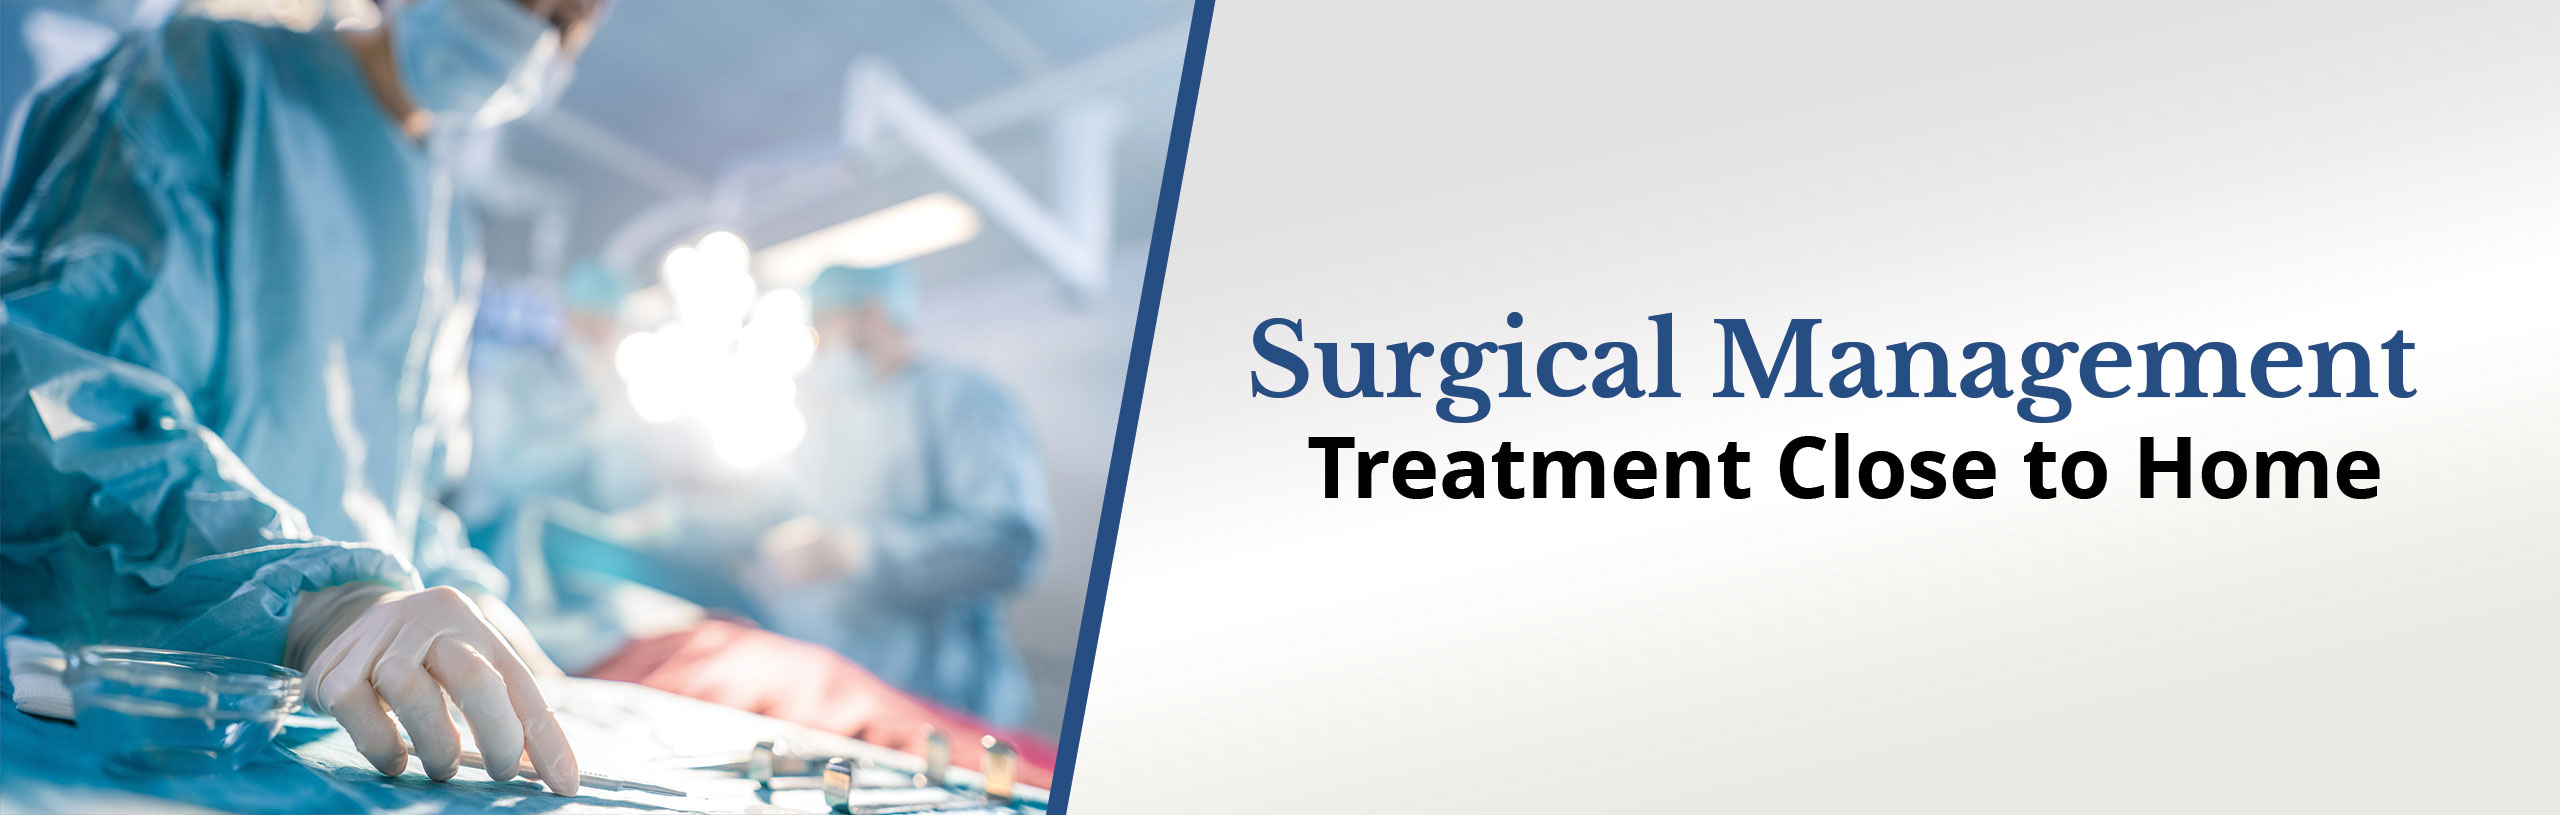 Surgical Management 
Treatment Close to Home